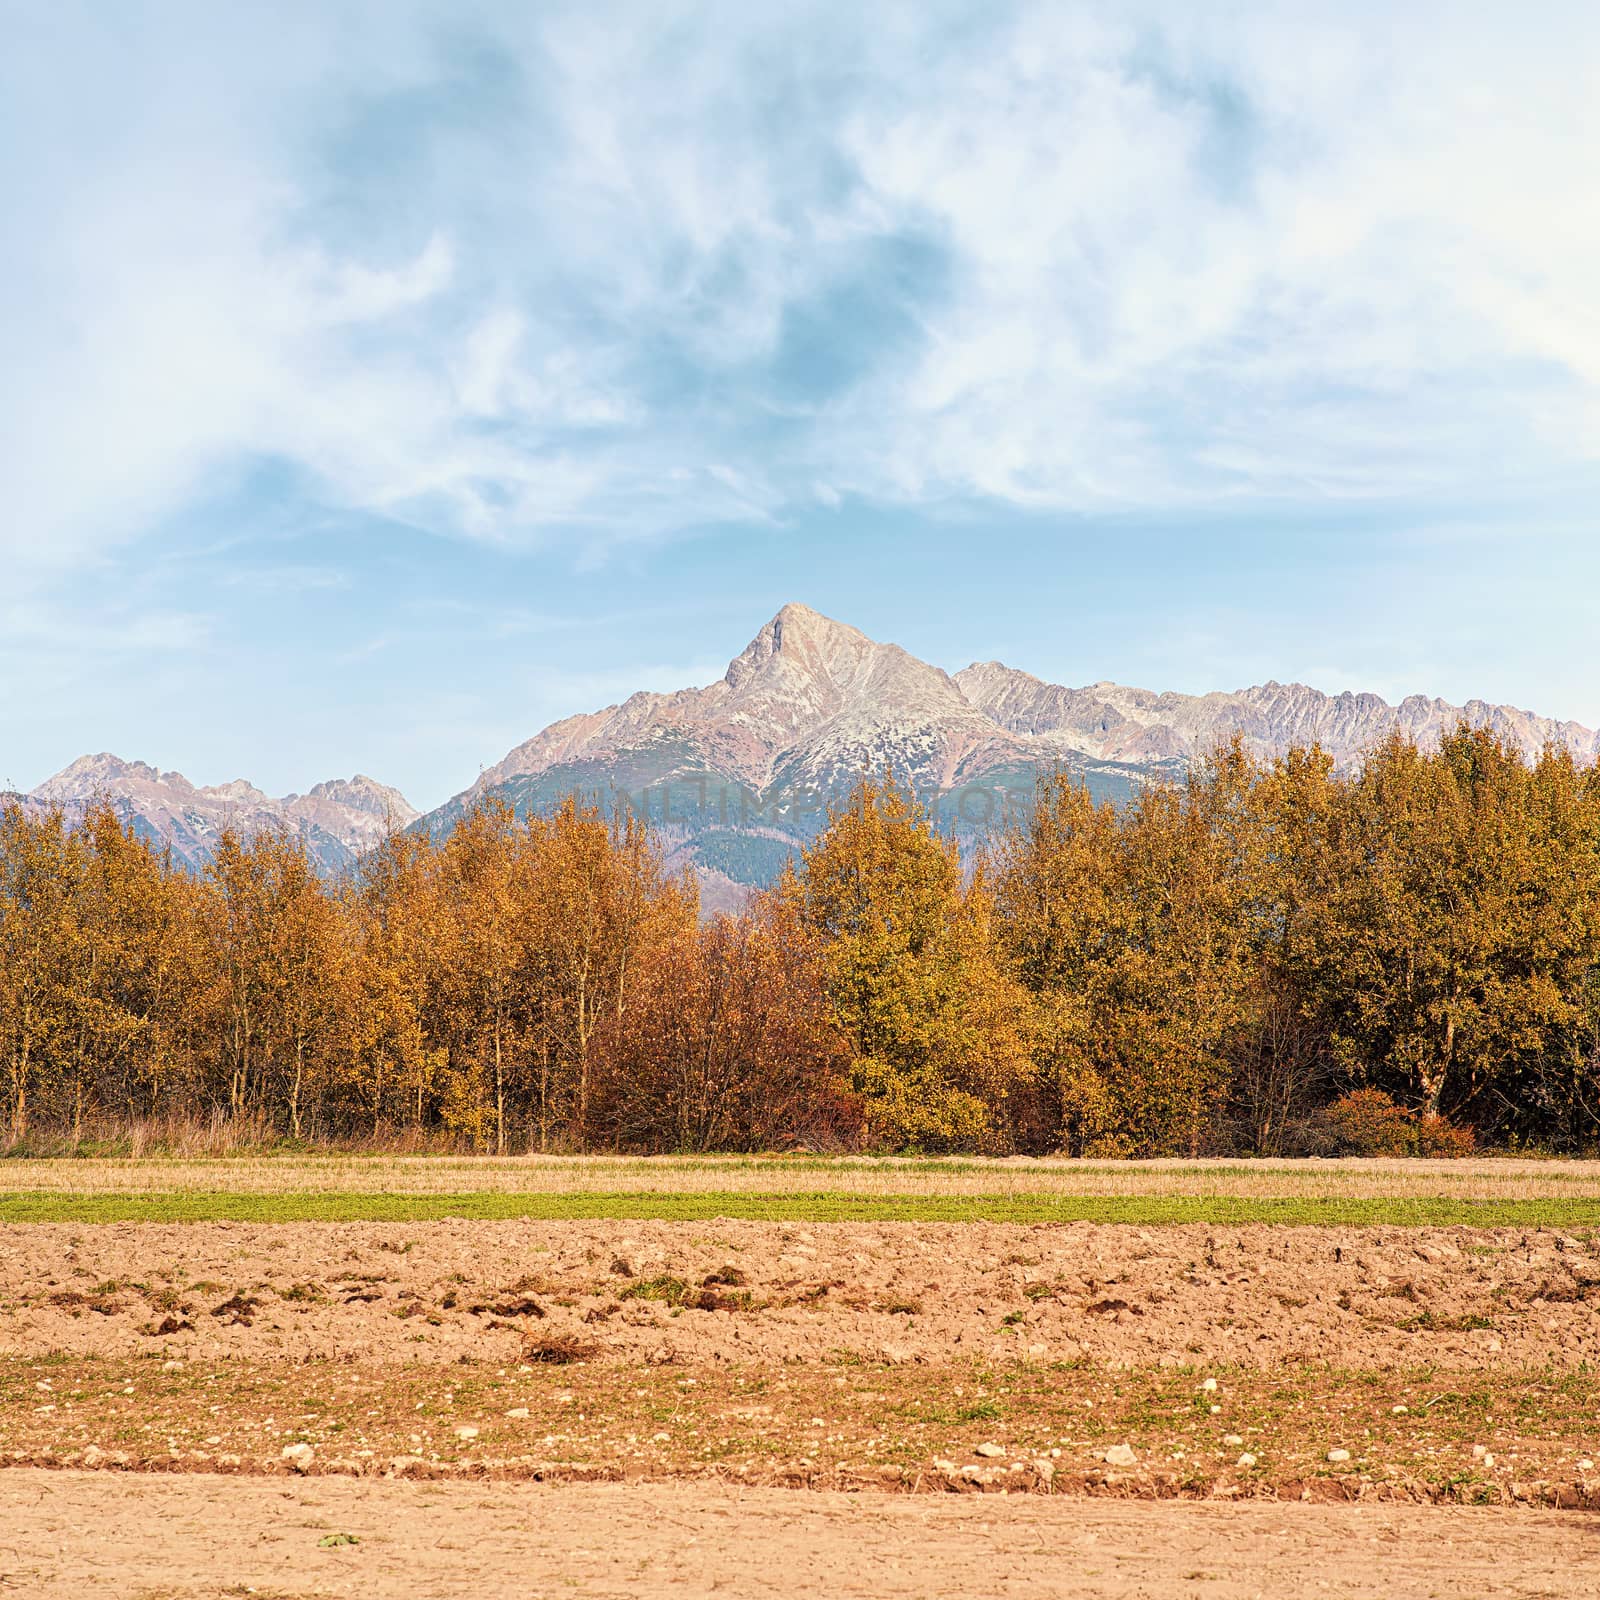 Mount Krivan peak Slovak symbol with blurred autumn coloured trees and dry field in foreground, Typical autumnal scenery of Liptov region, Slovakia.